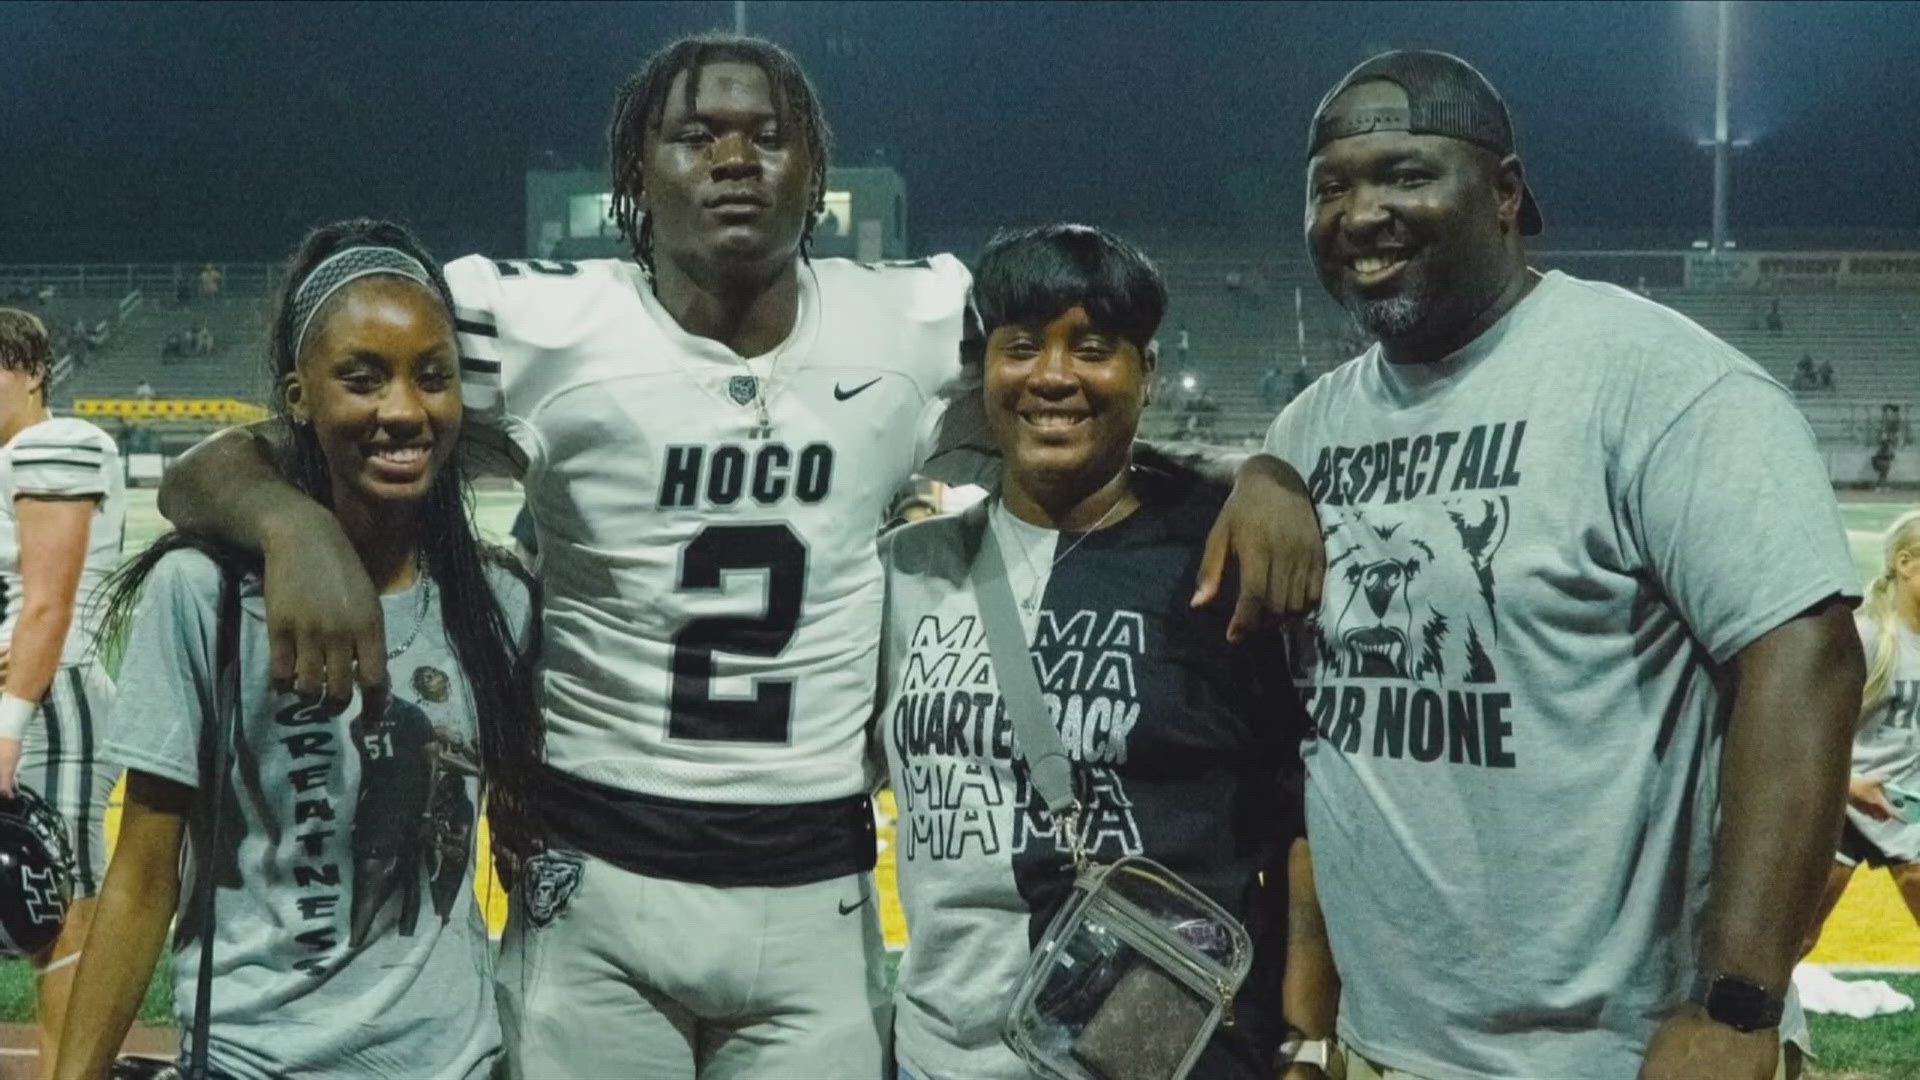 During an Instagram live that included Atlanta-based rapper Quavo, Class of 2025 4-star quarterback Antwann Hill Jr. (AJ) announced his commitment to the Tigers.